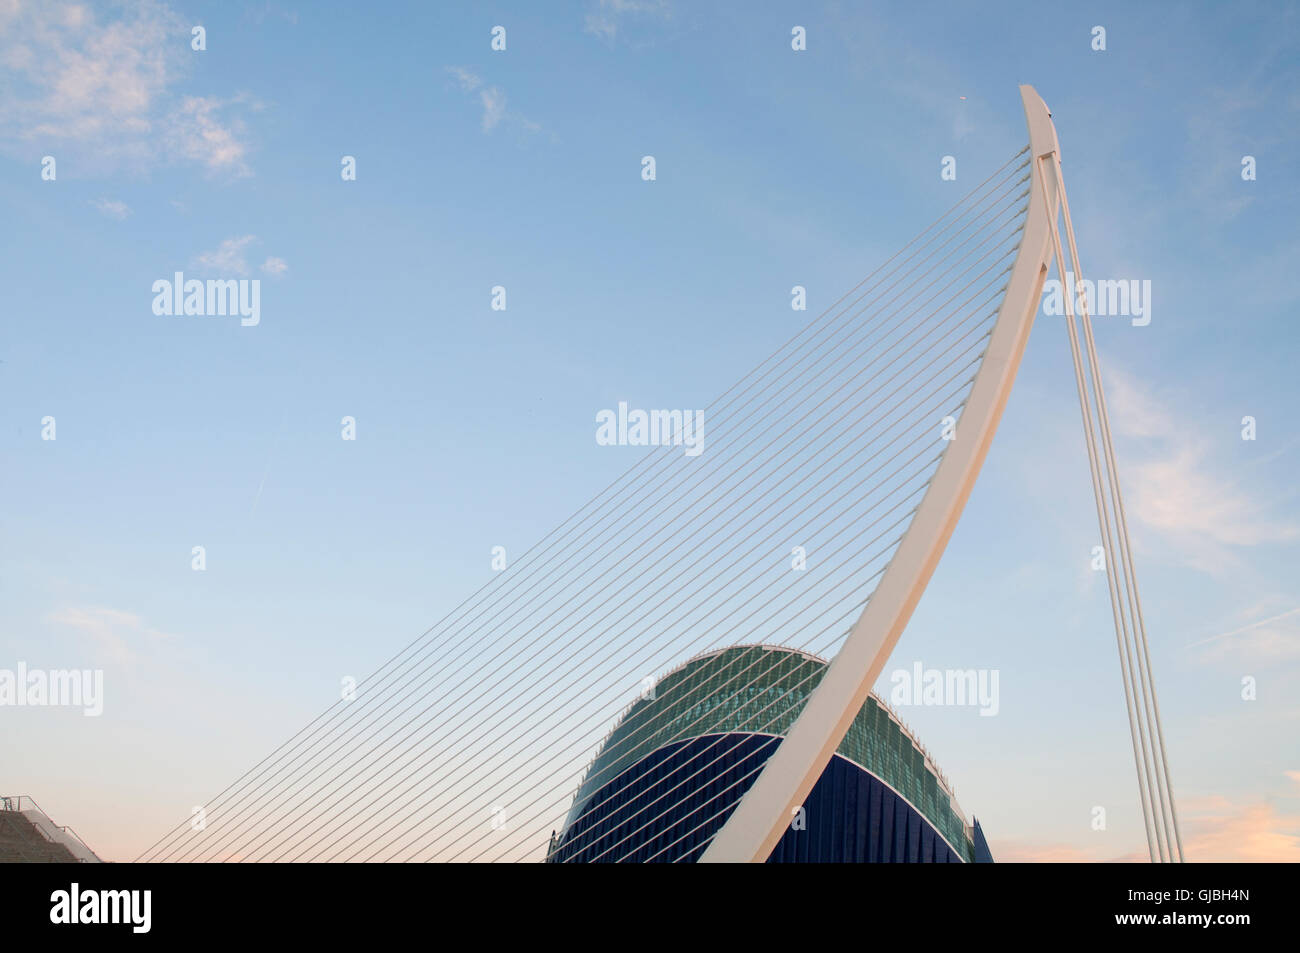 L'Assut d'Or bridge and The Agora at dusk. City of Arts and Sciences, Valencia, Spain. Stock Photo